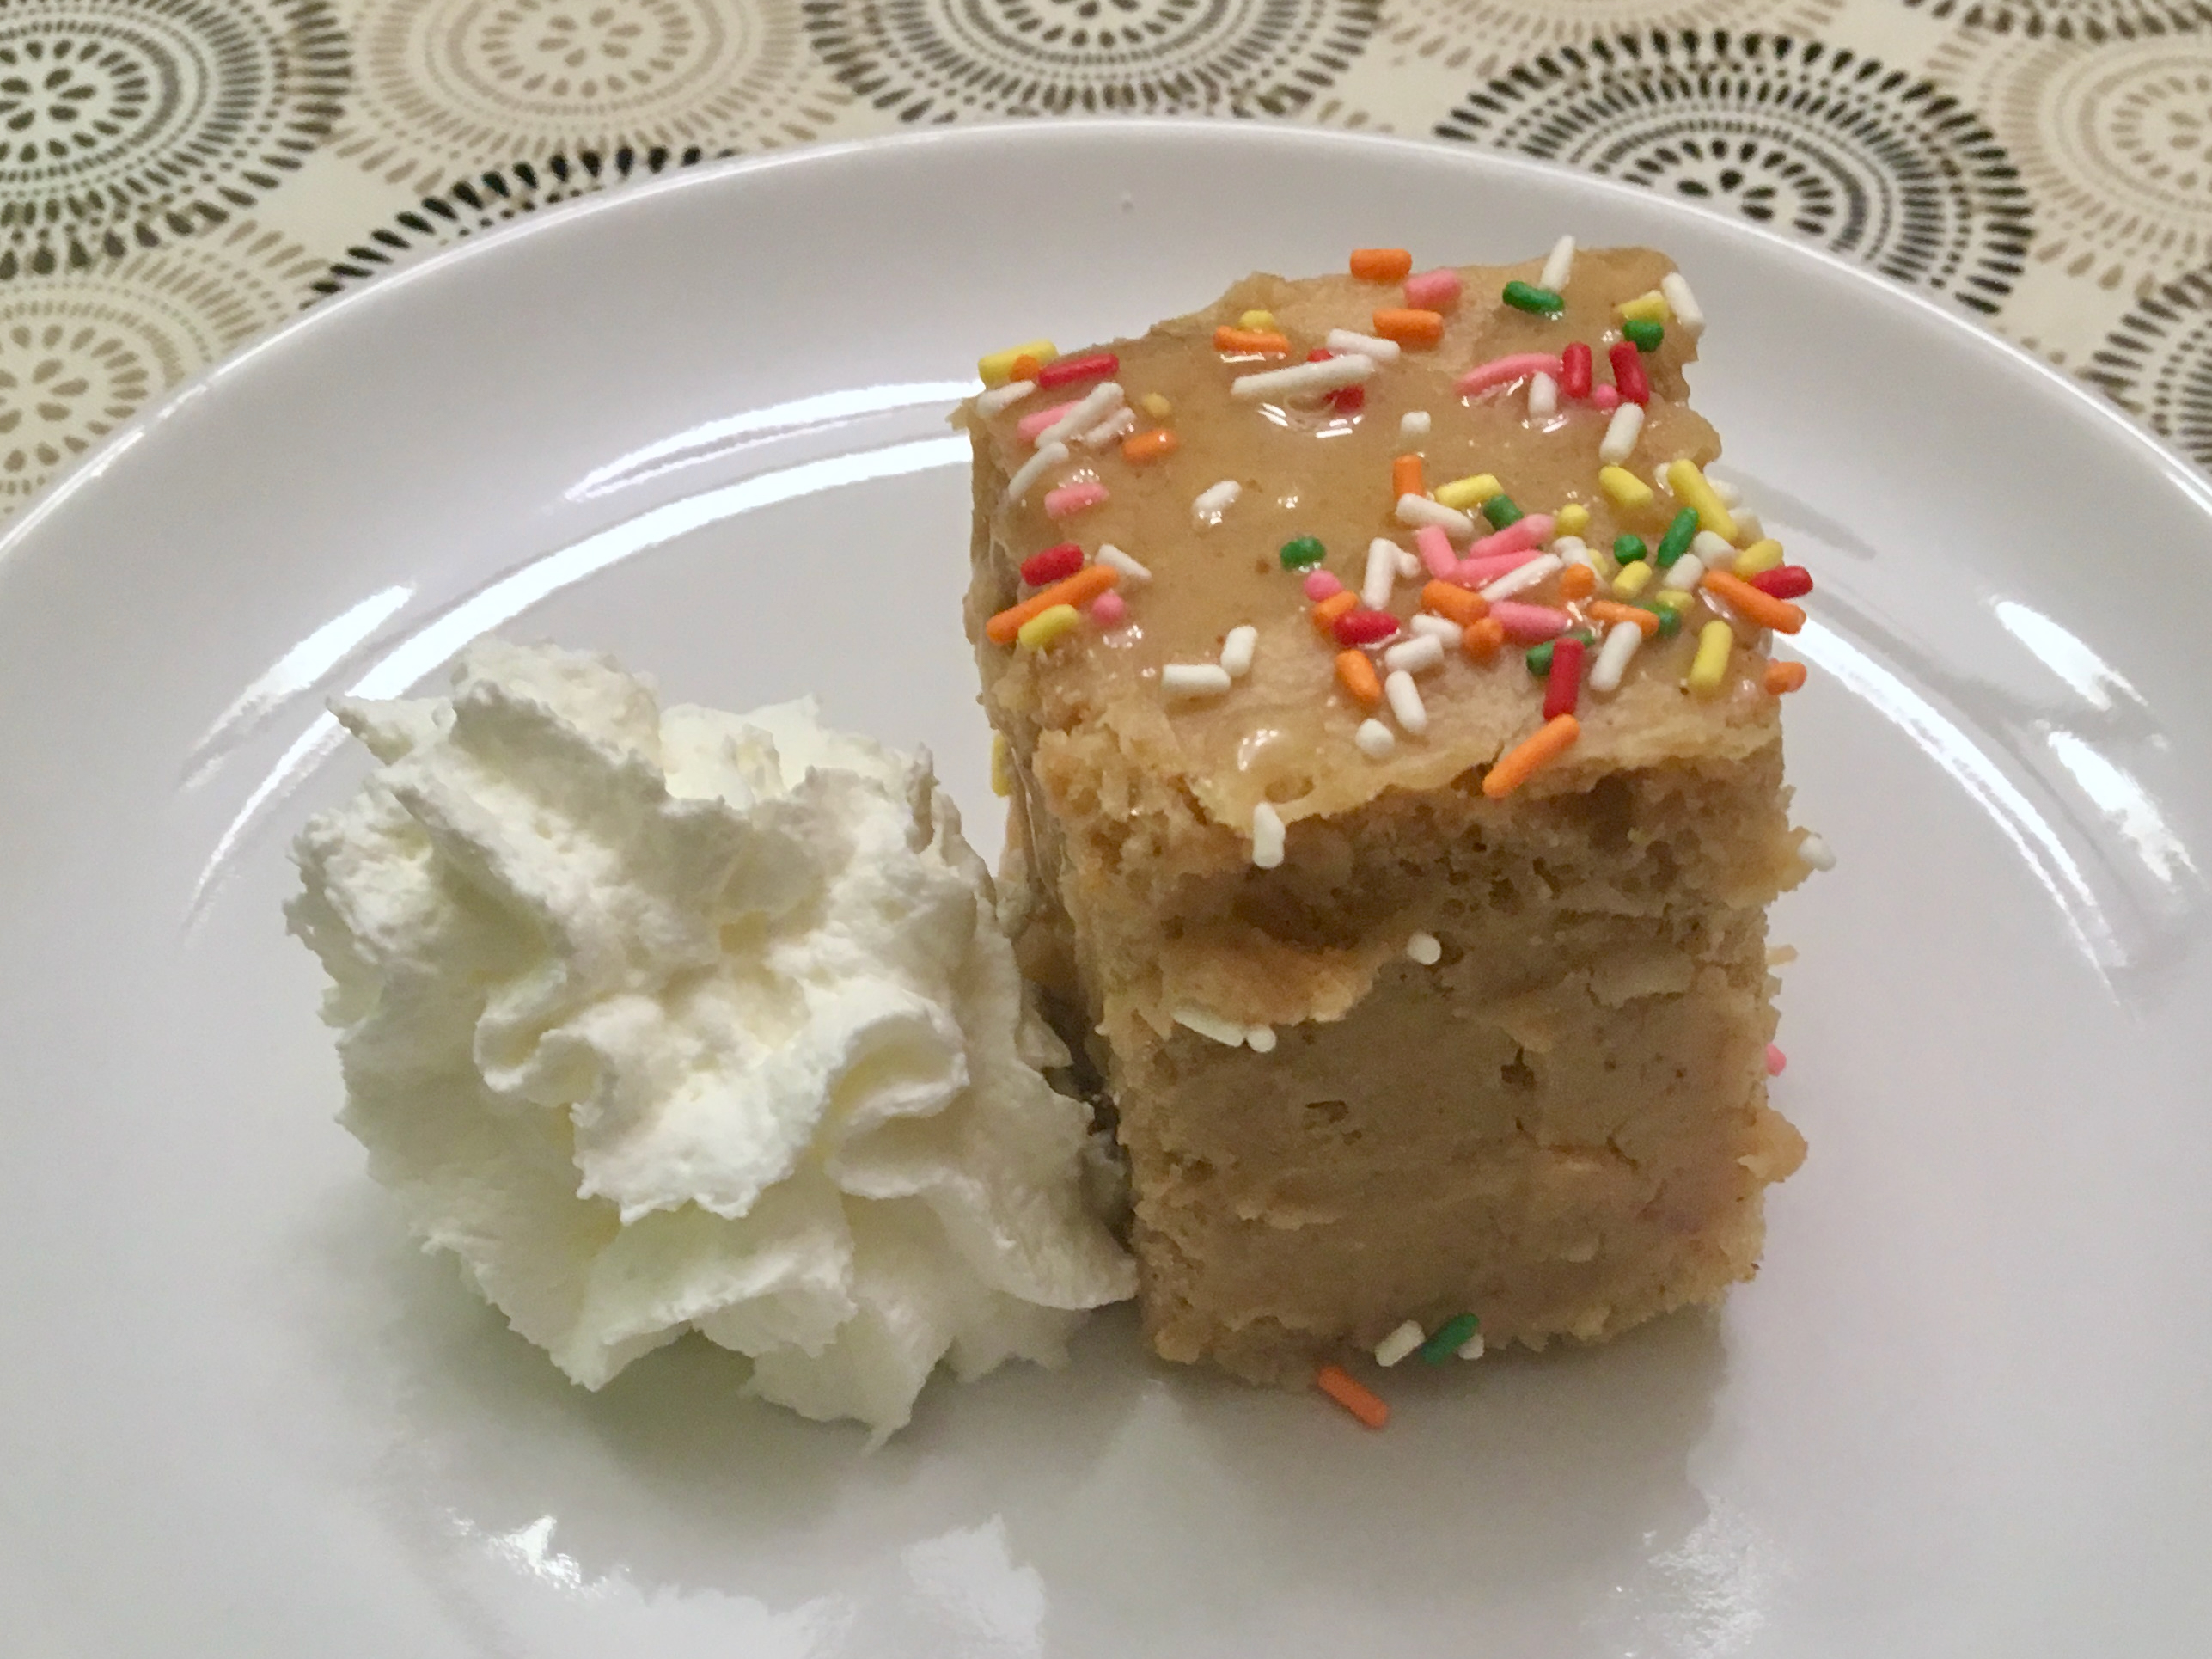 A cube-slice of salt roasted peanut cake topped with jimmies, with a shot of whipped cream on the side.